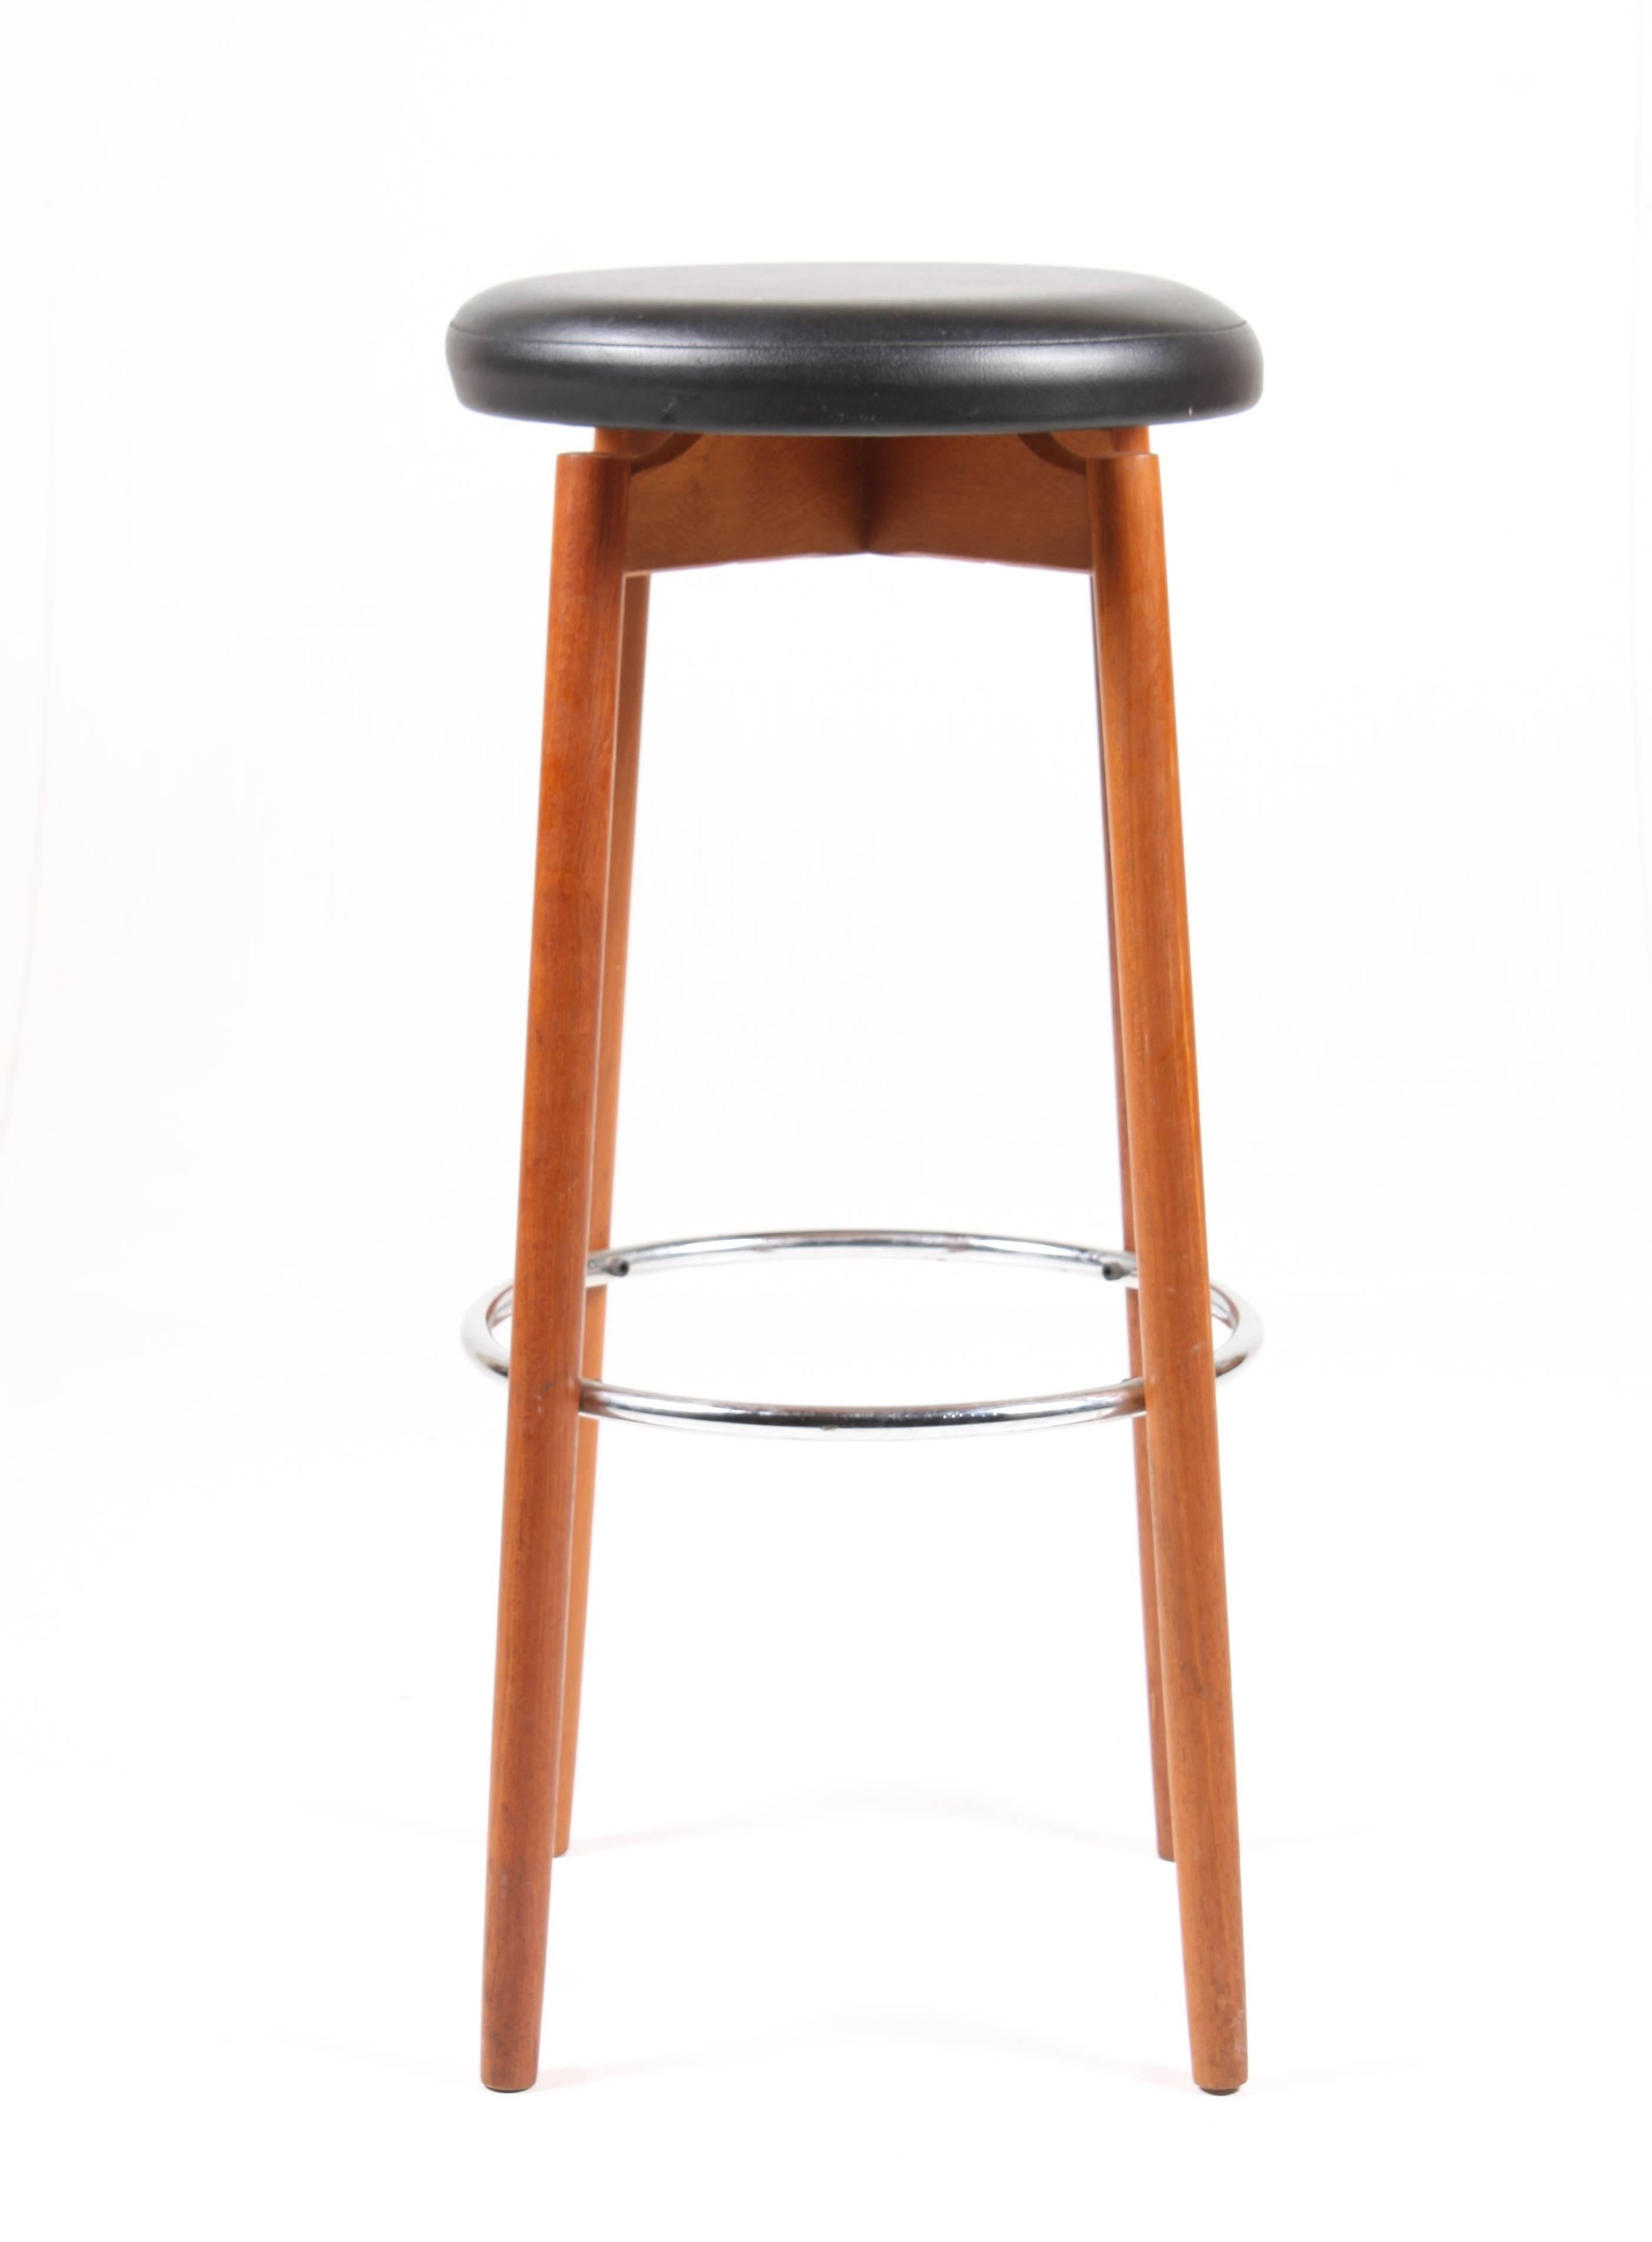 Set of three great looking high stools in solid teak with a chromed metal footrest and black vinyl seats. Perfect for a bar or in the kitchen. Made in Denmark in the1960s. Great condition.